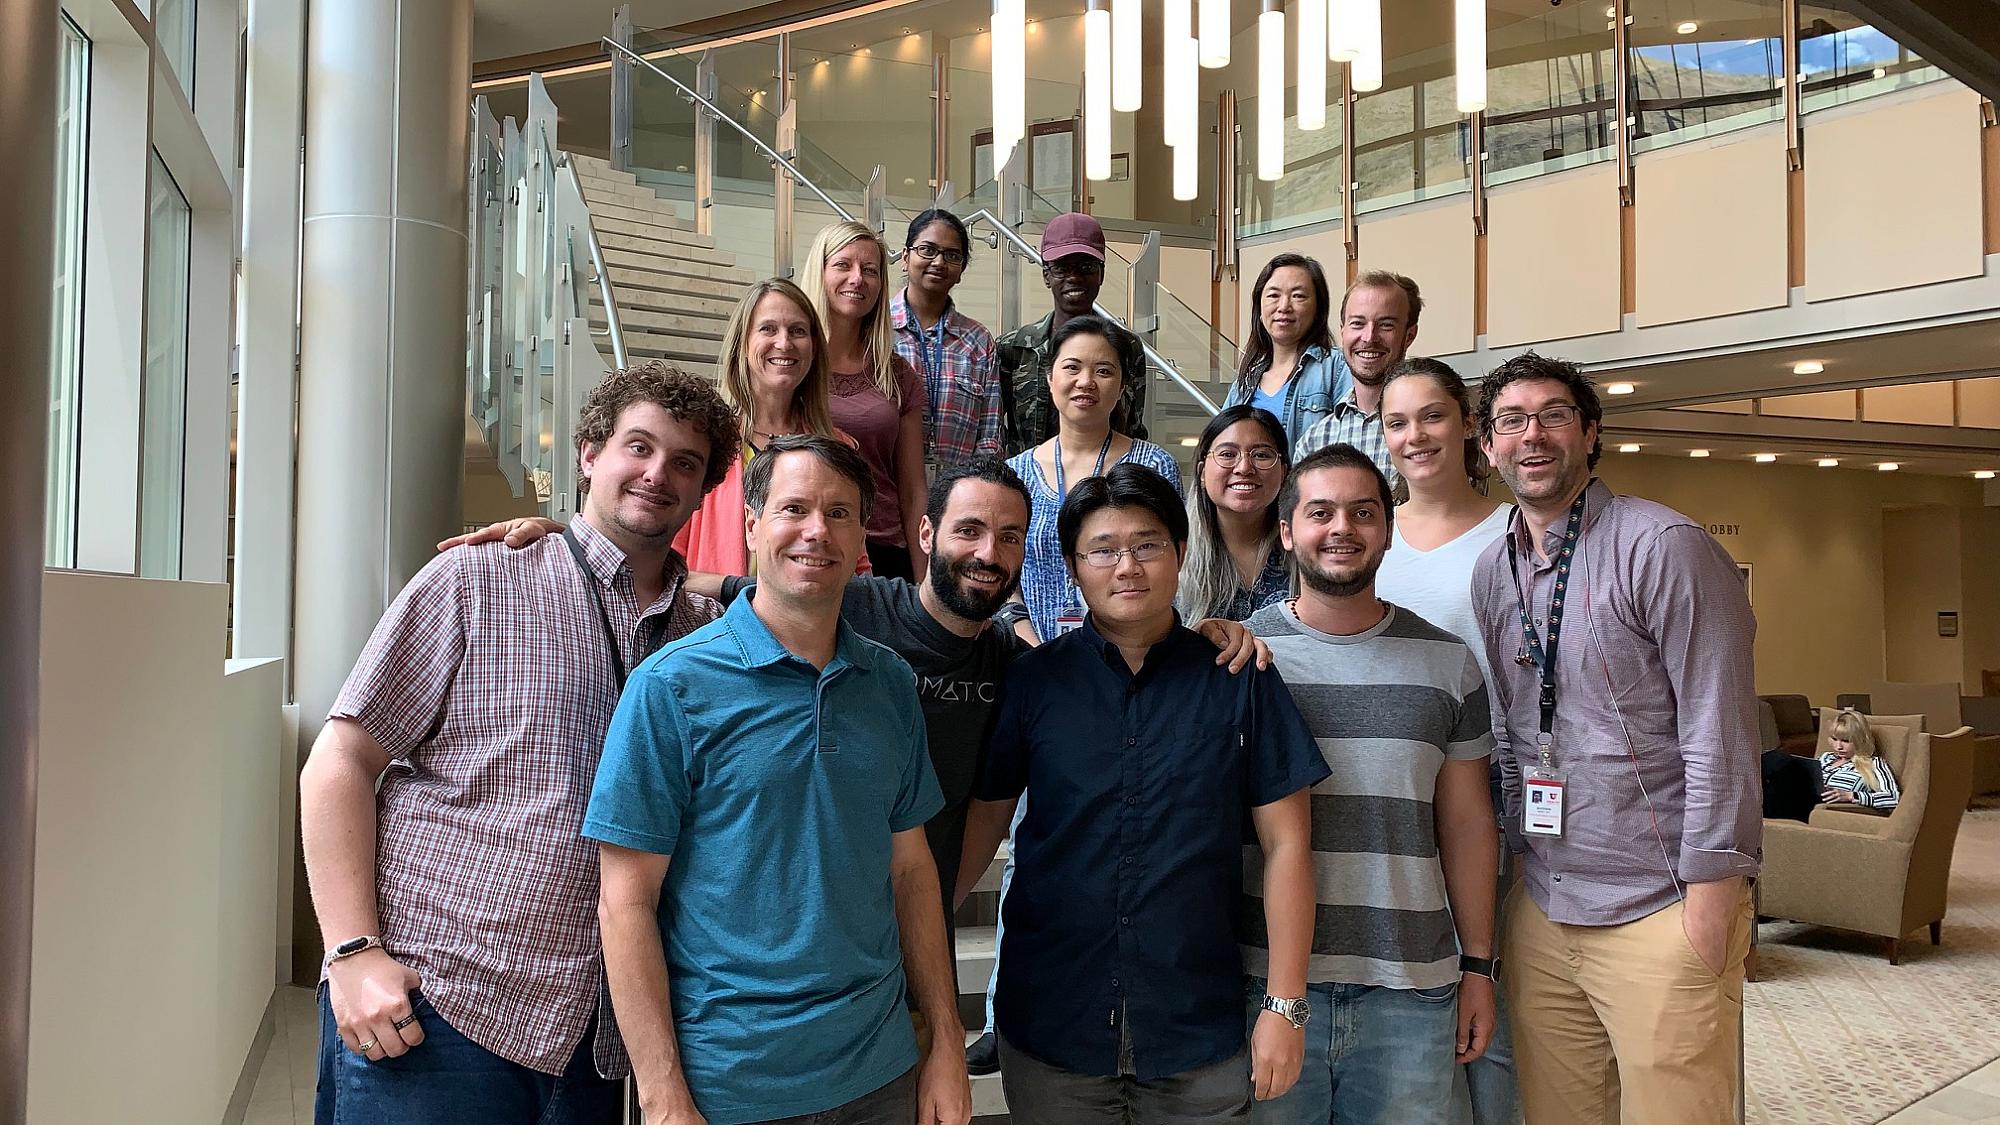 Welm Lab group standing on stairs together